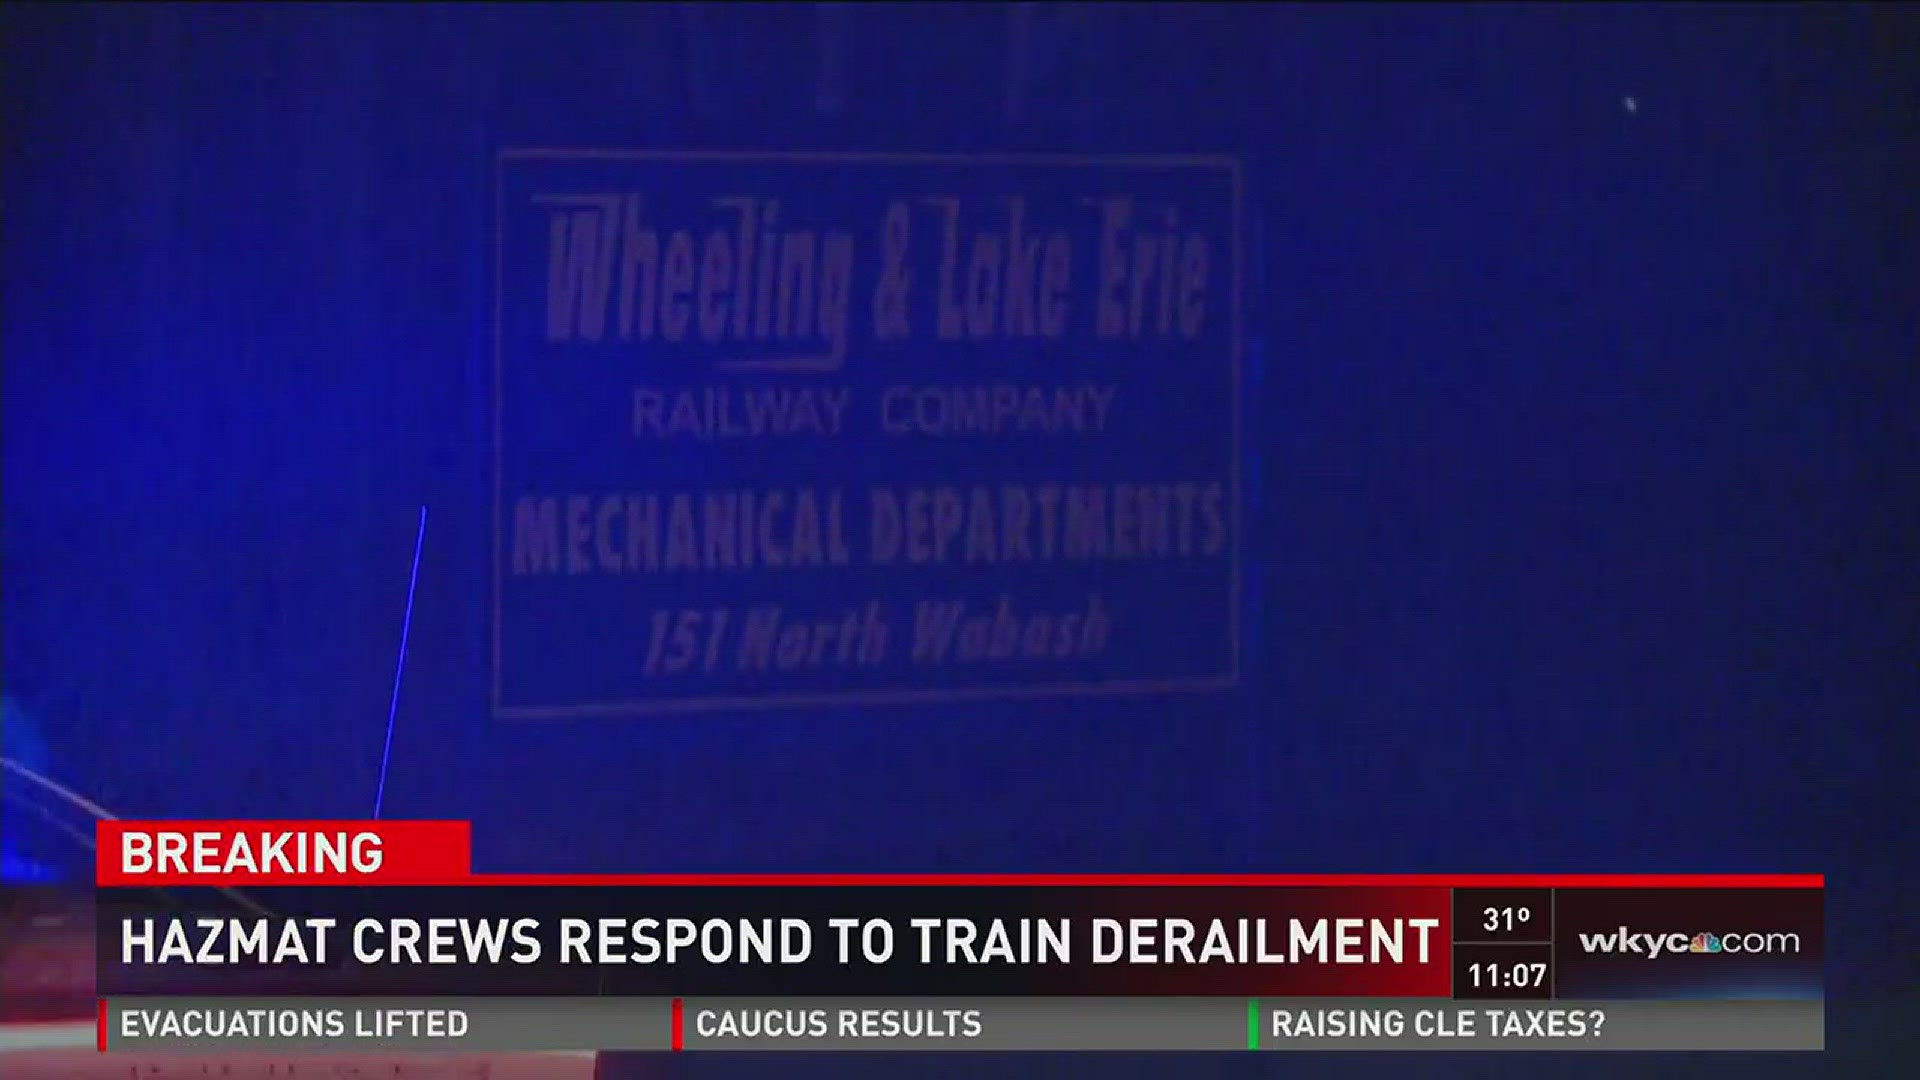 The train was carrying liquid petroleum before going off track, catching fire.